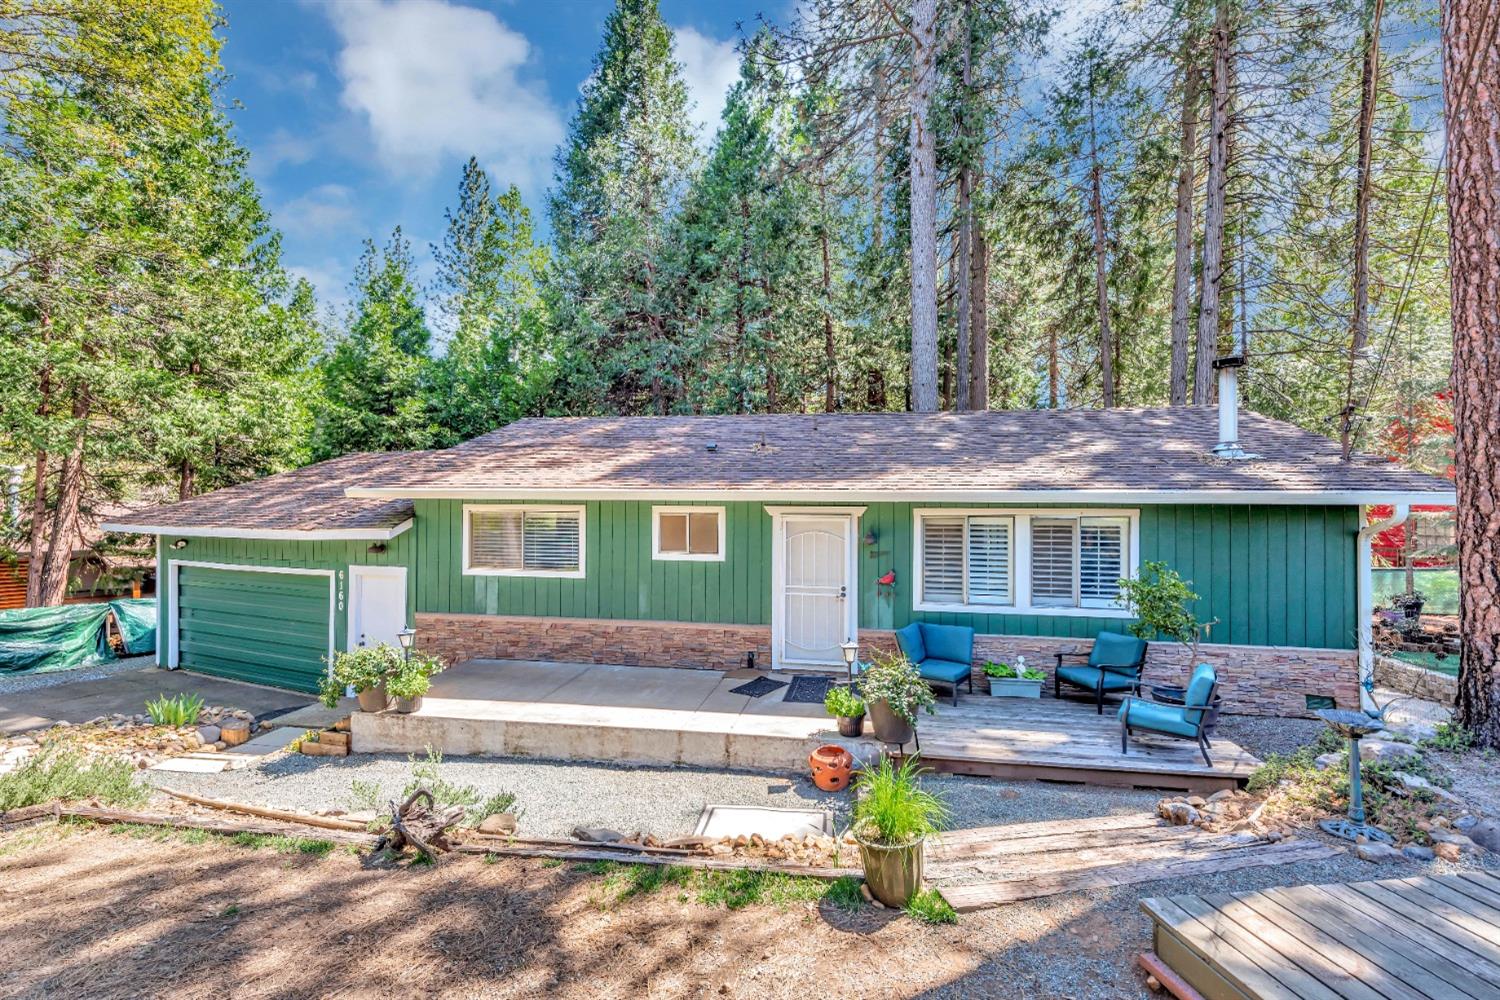 Photo of 6160 Speckled Rd in Pollock Pines, CA